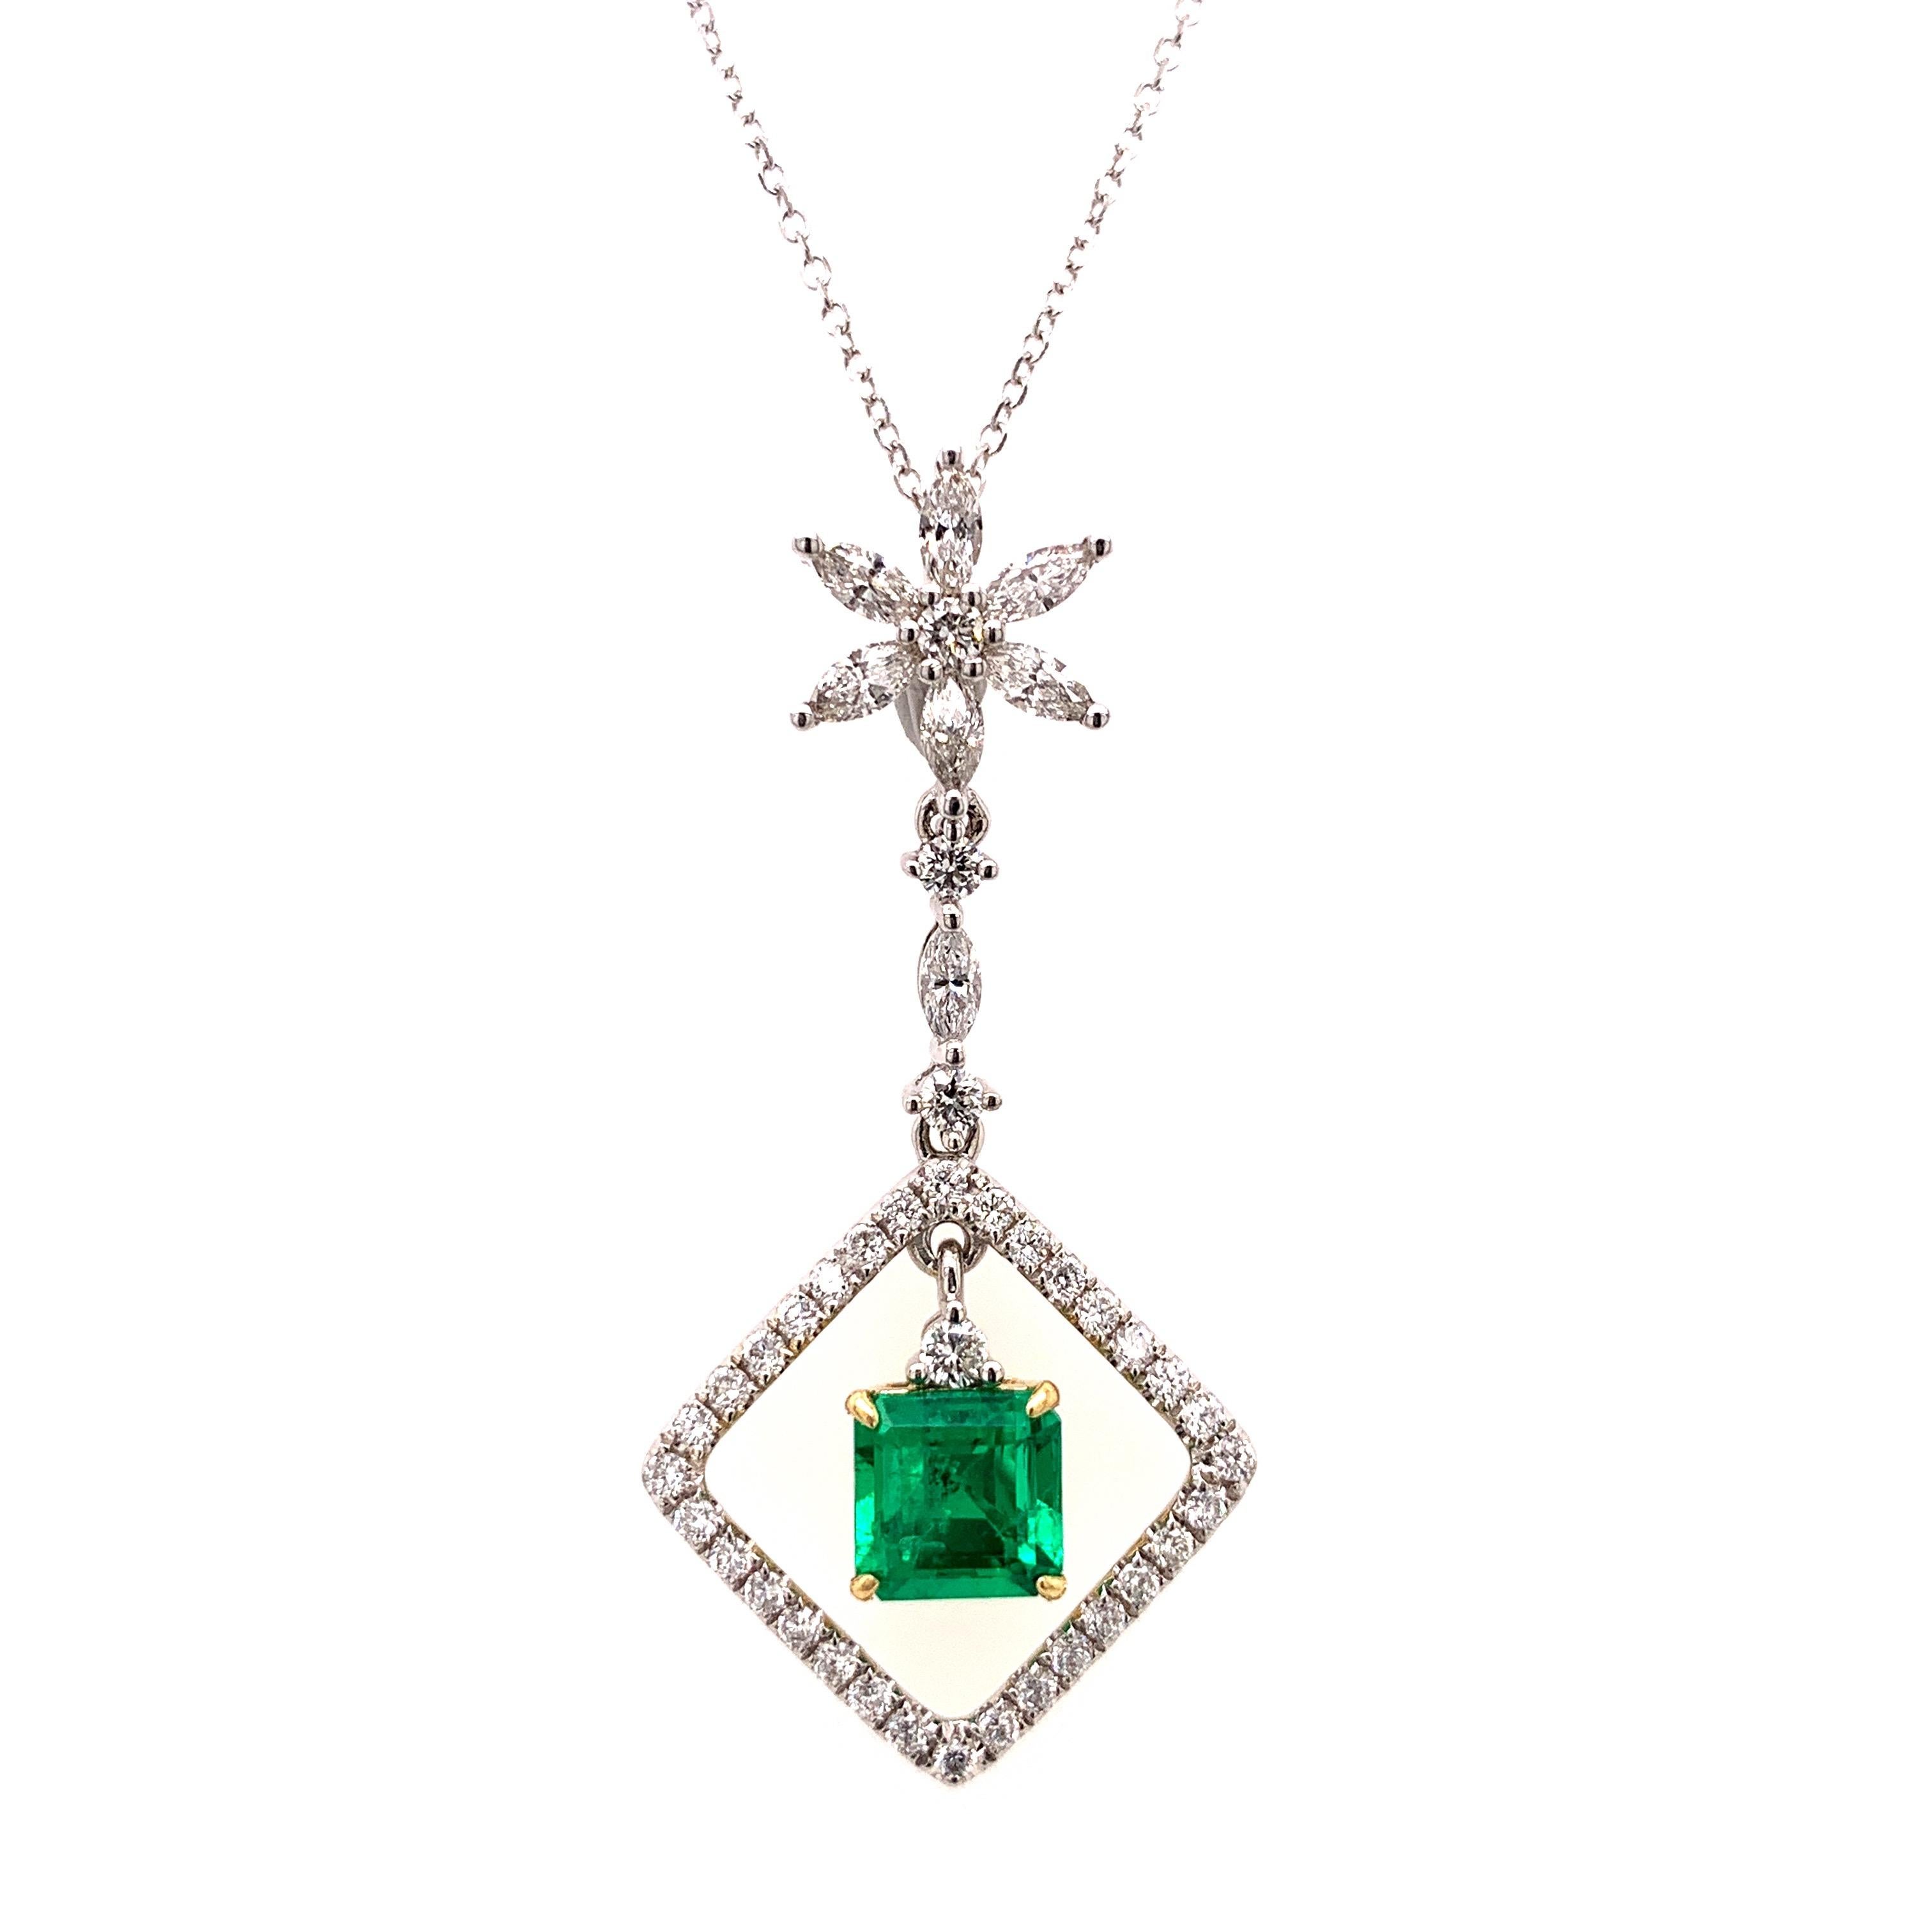 Elegant dangling emerald diamond pendant. Lively green, transparent, high lustre, square faceted, natural Colombian 1.01 carats emerald mounted in high profile open basket with four prongs in dangling setting, accented with marquise and round